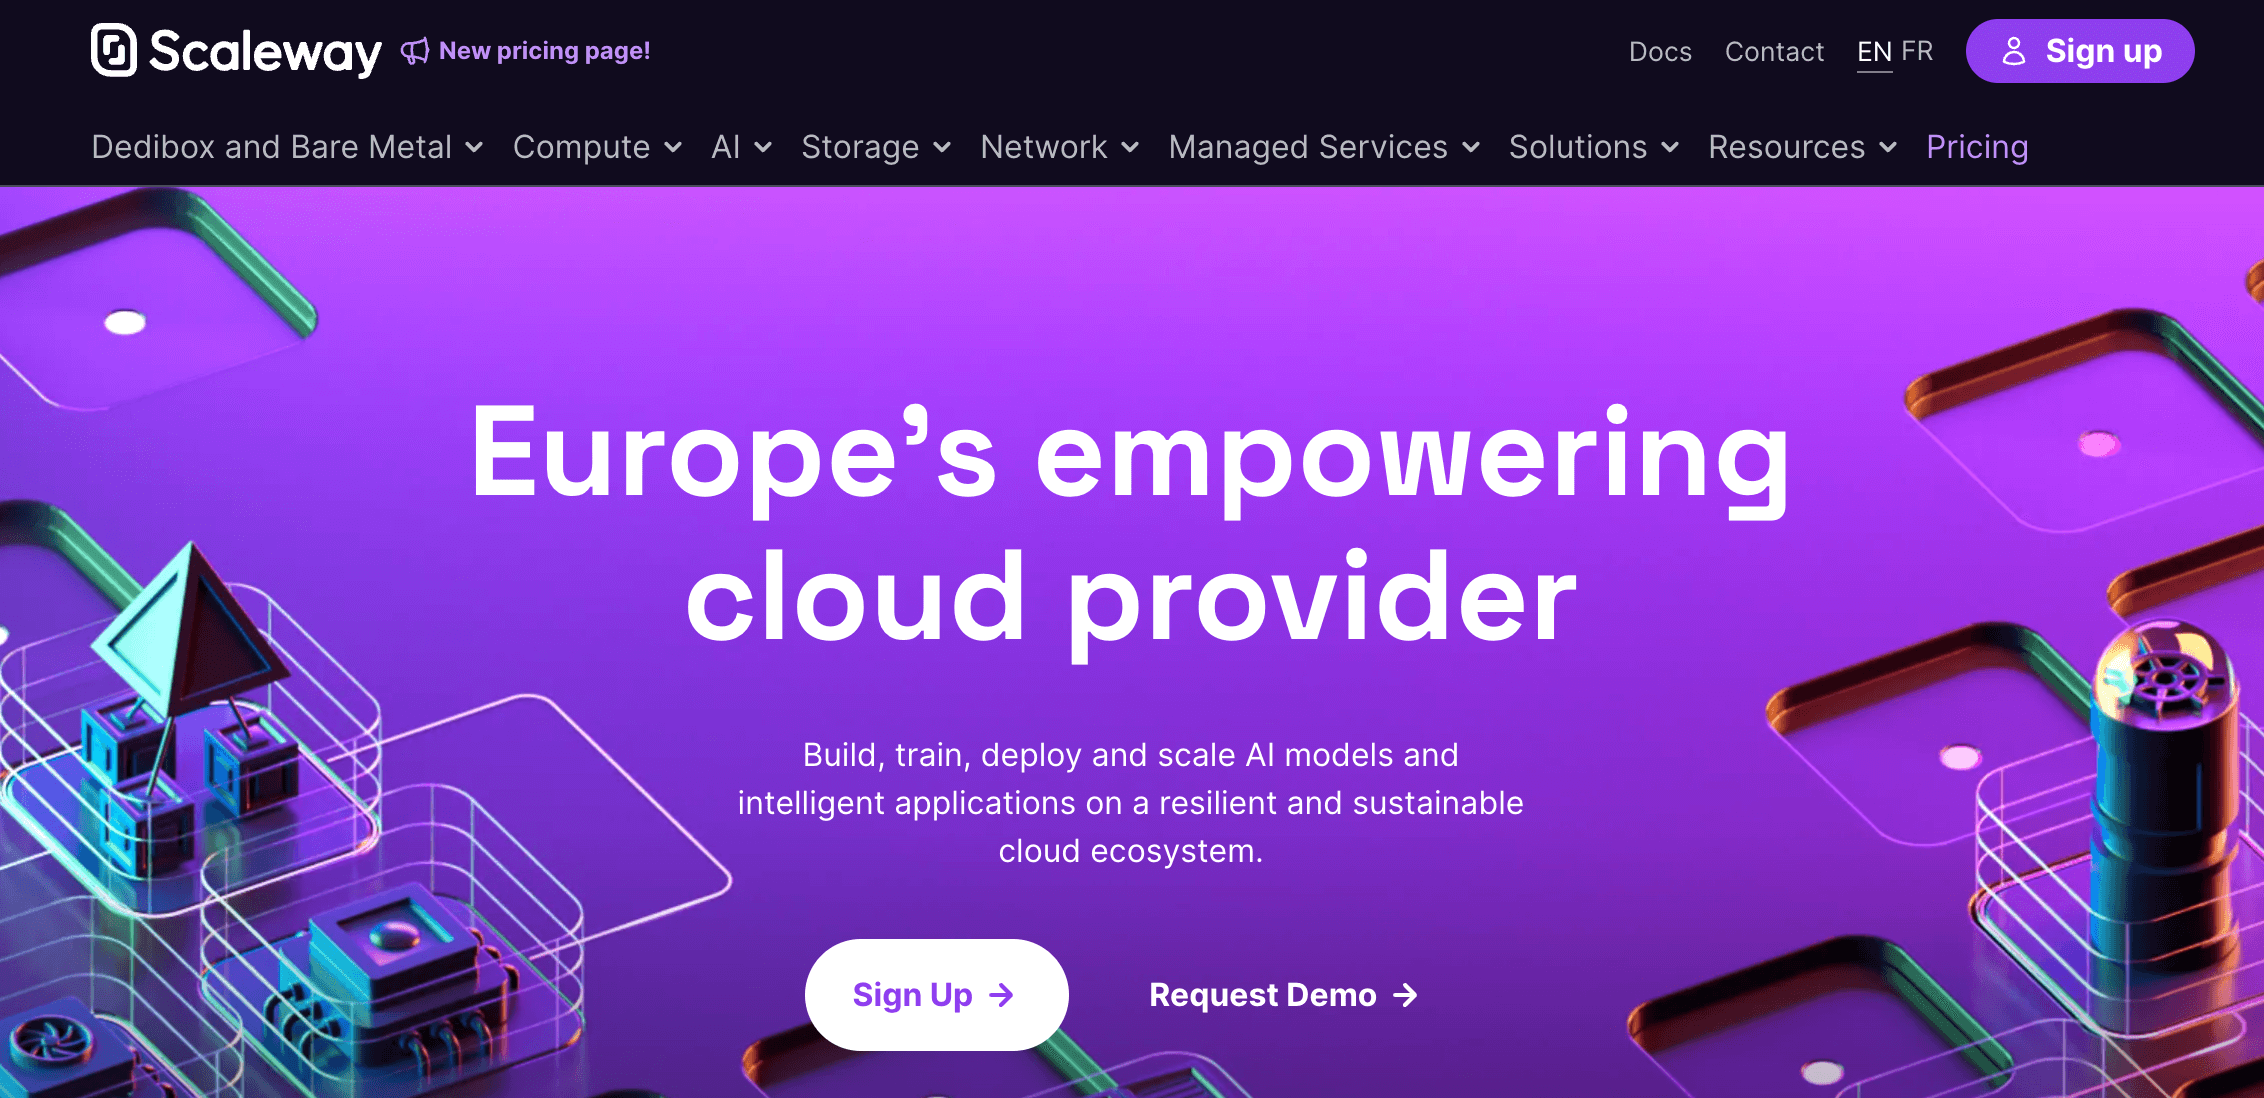 Scaleway website home page